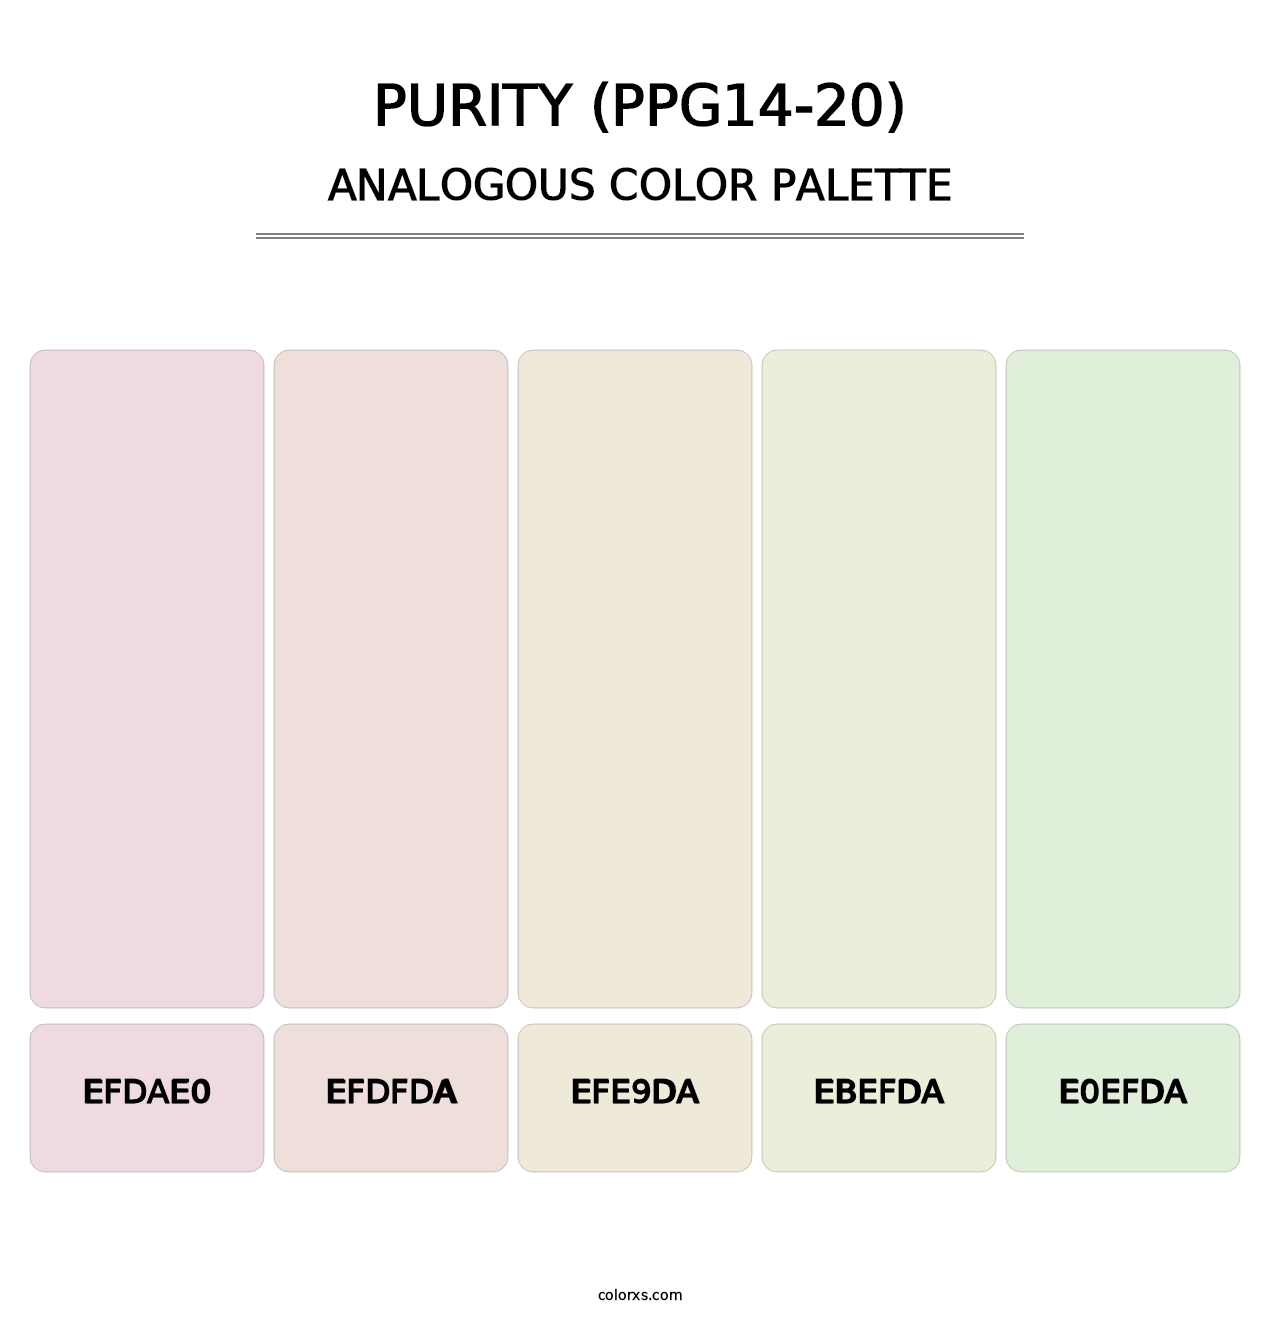 Purity (PPG14-20) - Analogous Color Palette